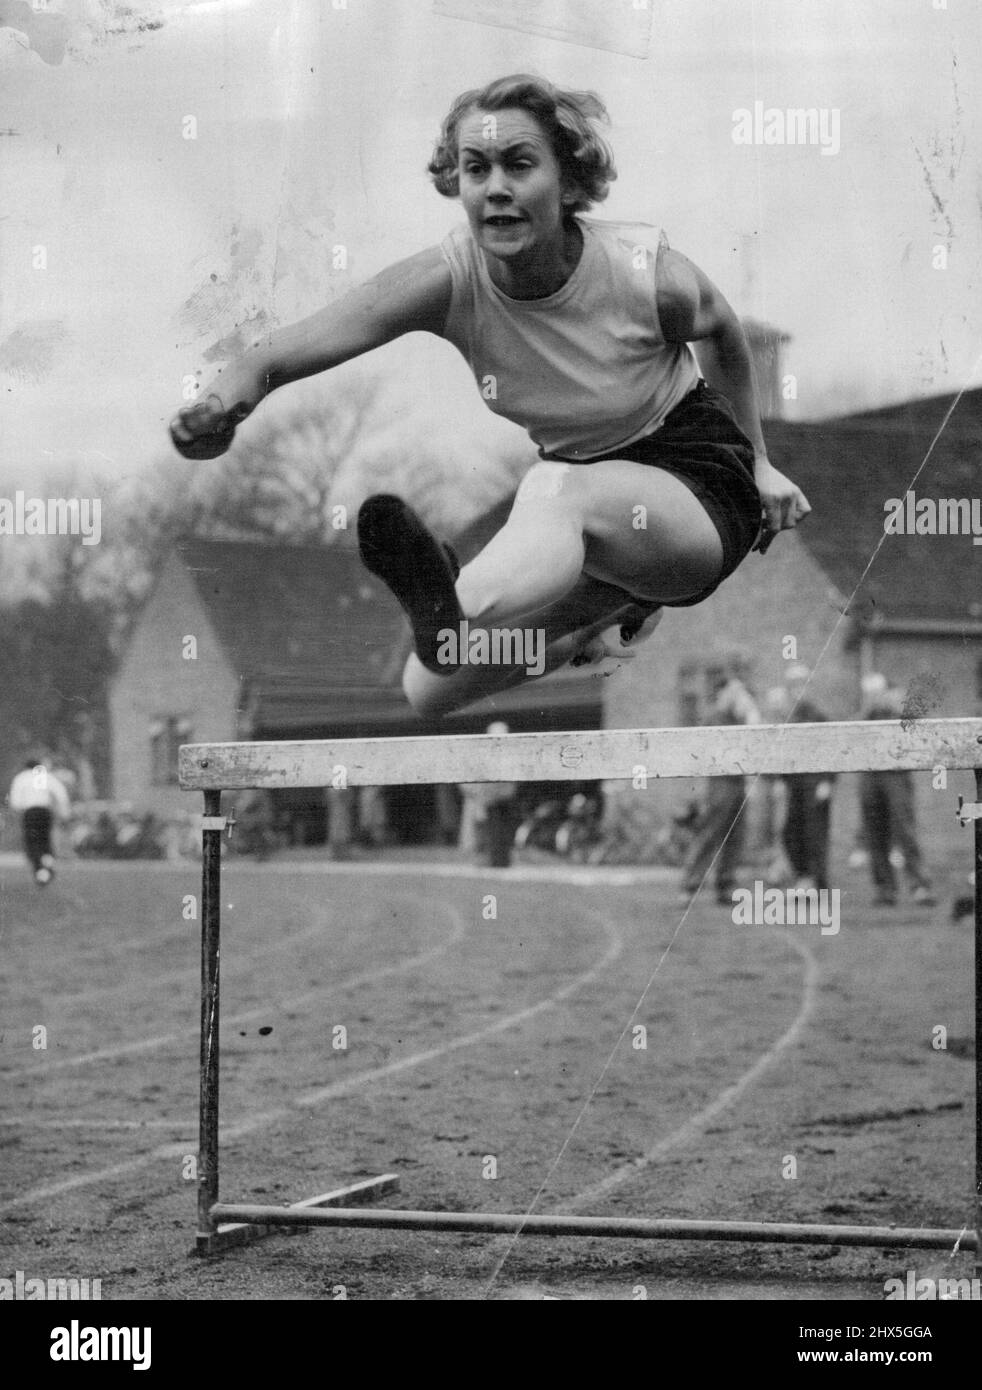 Best Foot Forward A jump ahead of the forthcoming athletic season is London girl hurdler Pamela French, of Spartan Ladies' athletic Club. She is seen taking a hurdle in fine style during practice on Tooting Bec Common, London. April 7, 1954. (Photo by Reuterphoto). Stock Photo